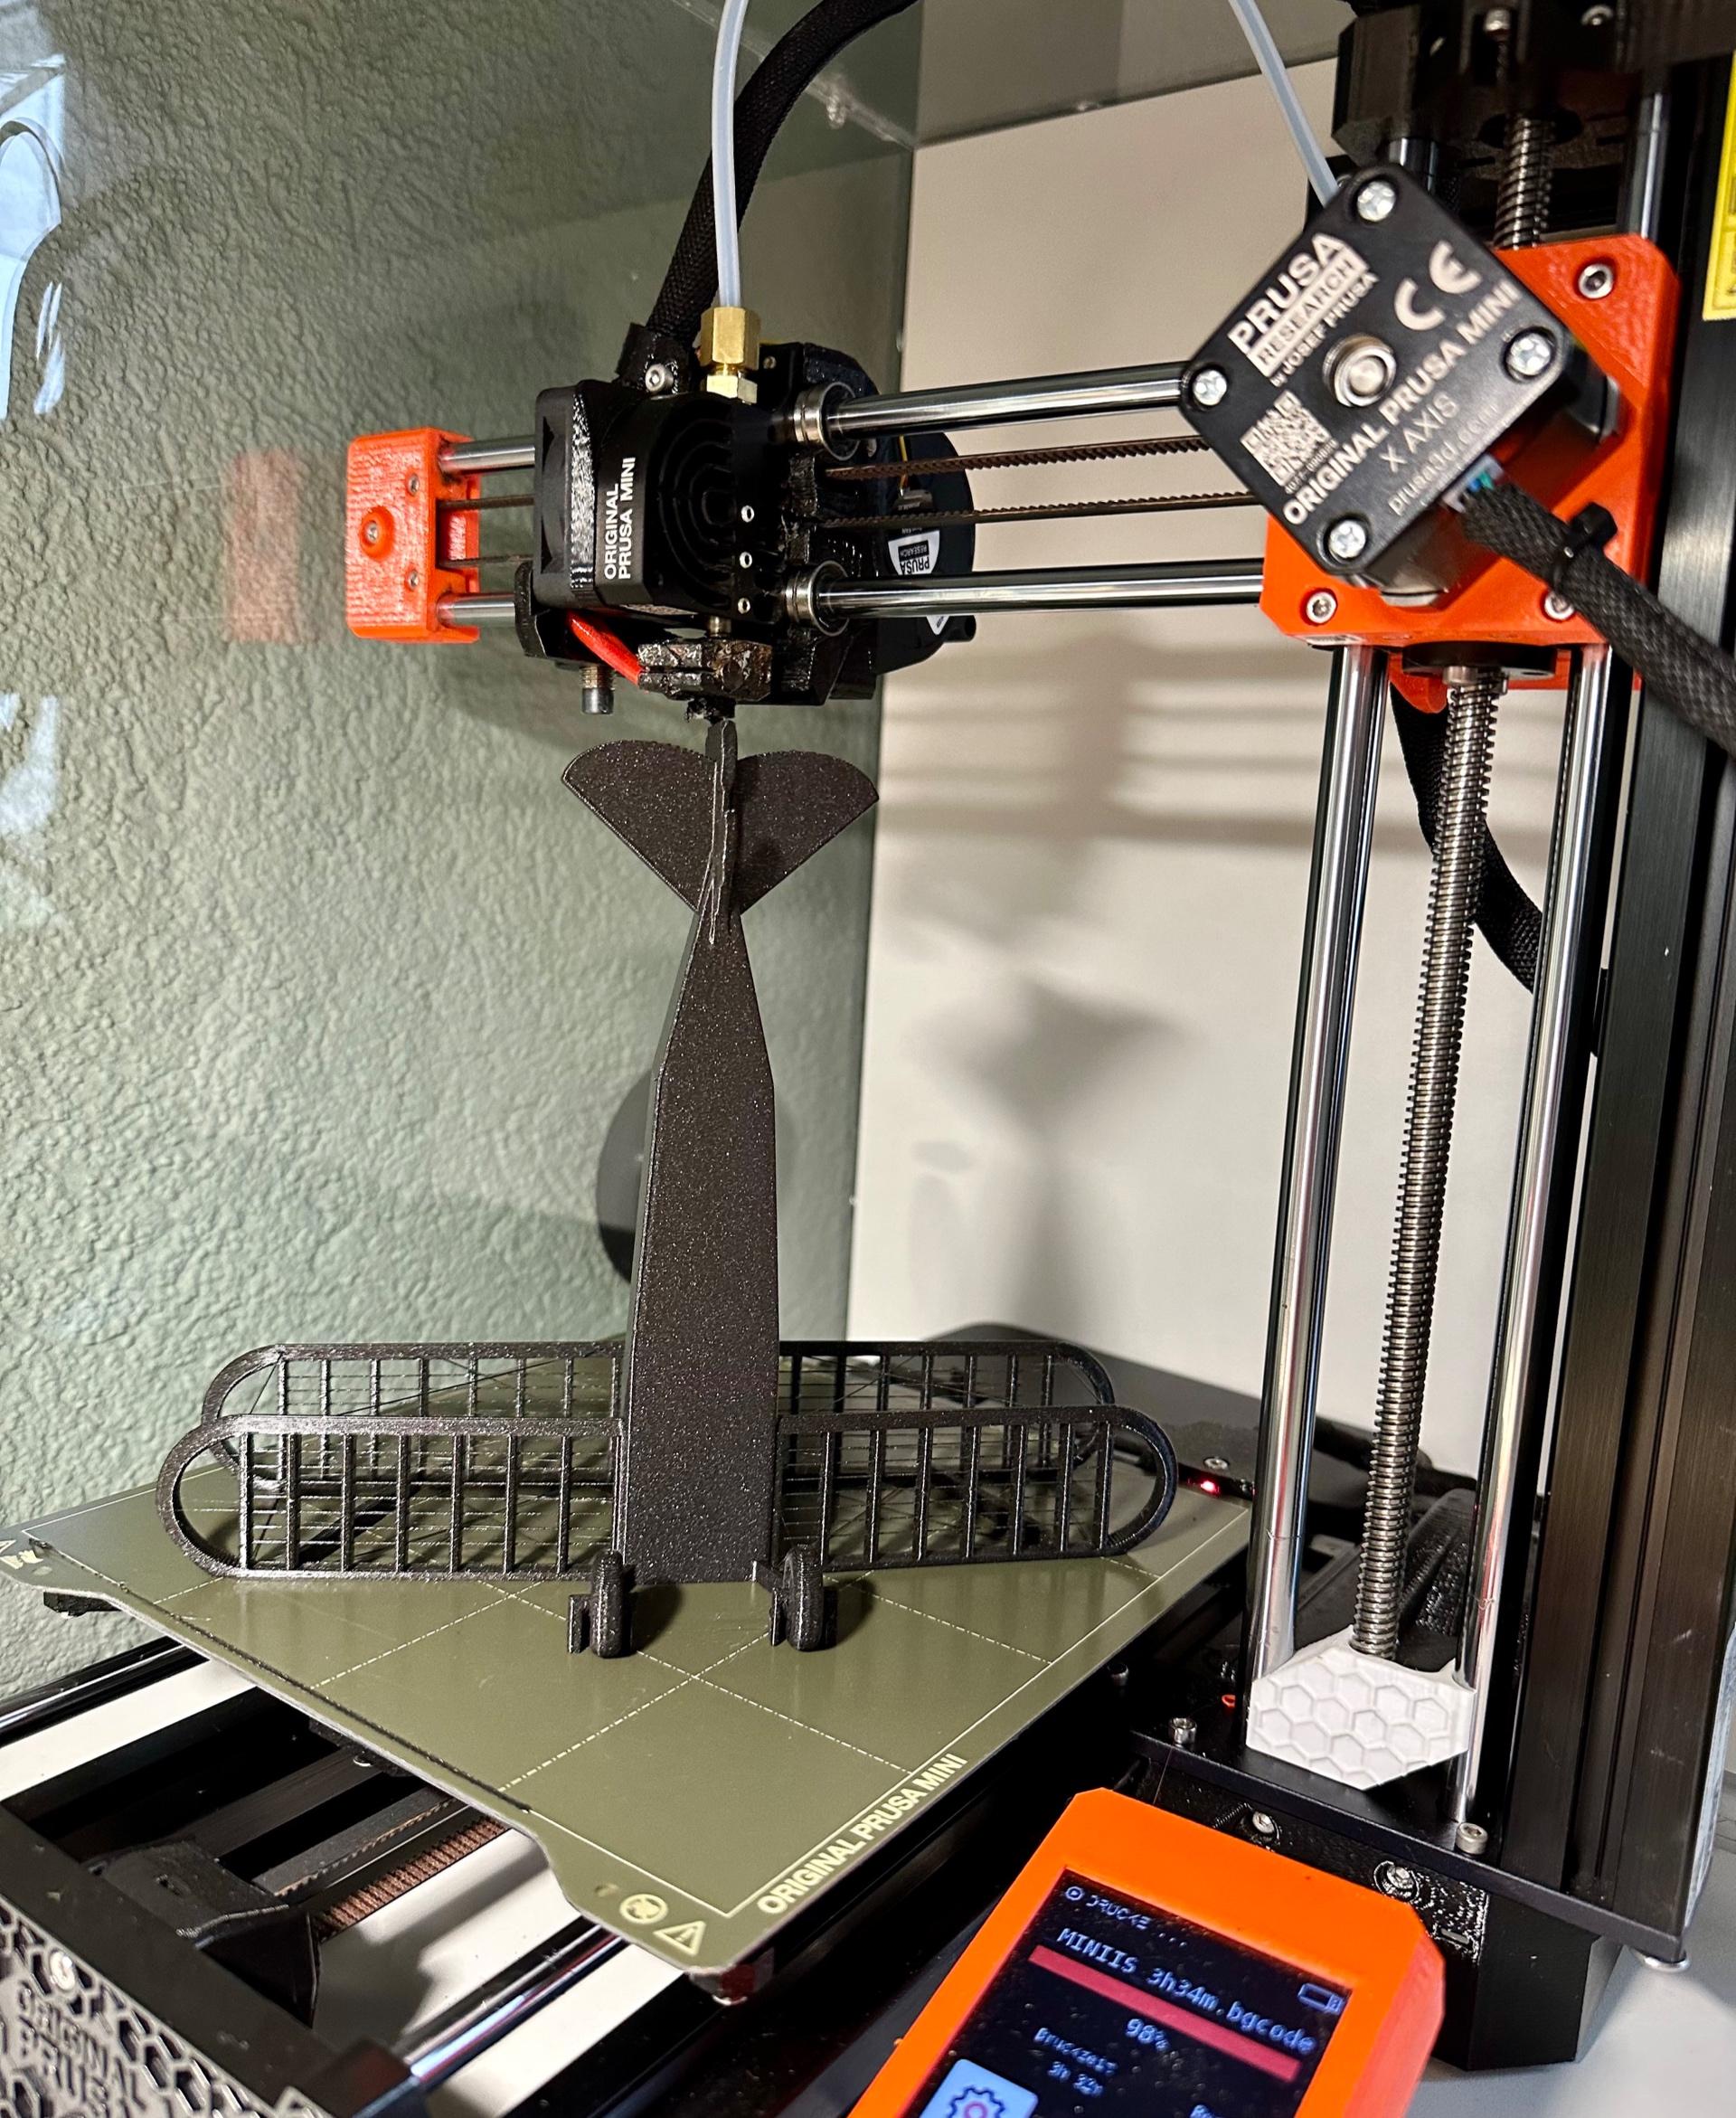 String Biplane:  No Supports - I did it just for fun.
Great design, worked well without supports.
PLA, 0,3mm layer on Prusa Mini+

Many thanks to #3dprintbunny - 3d model